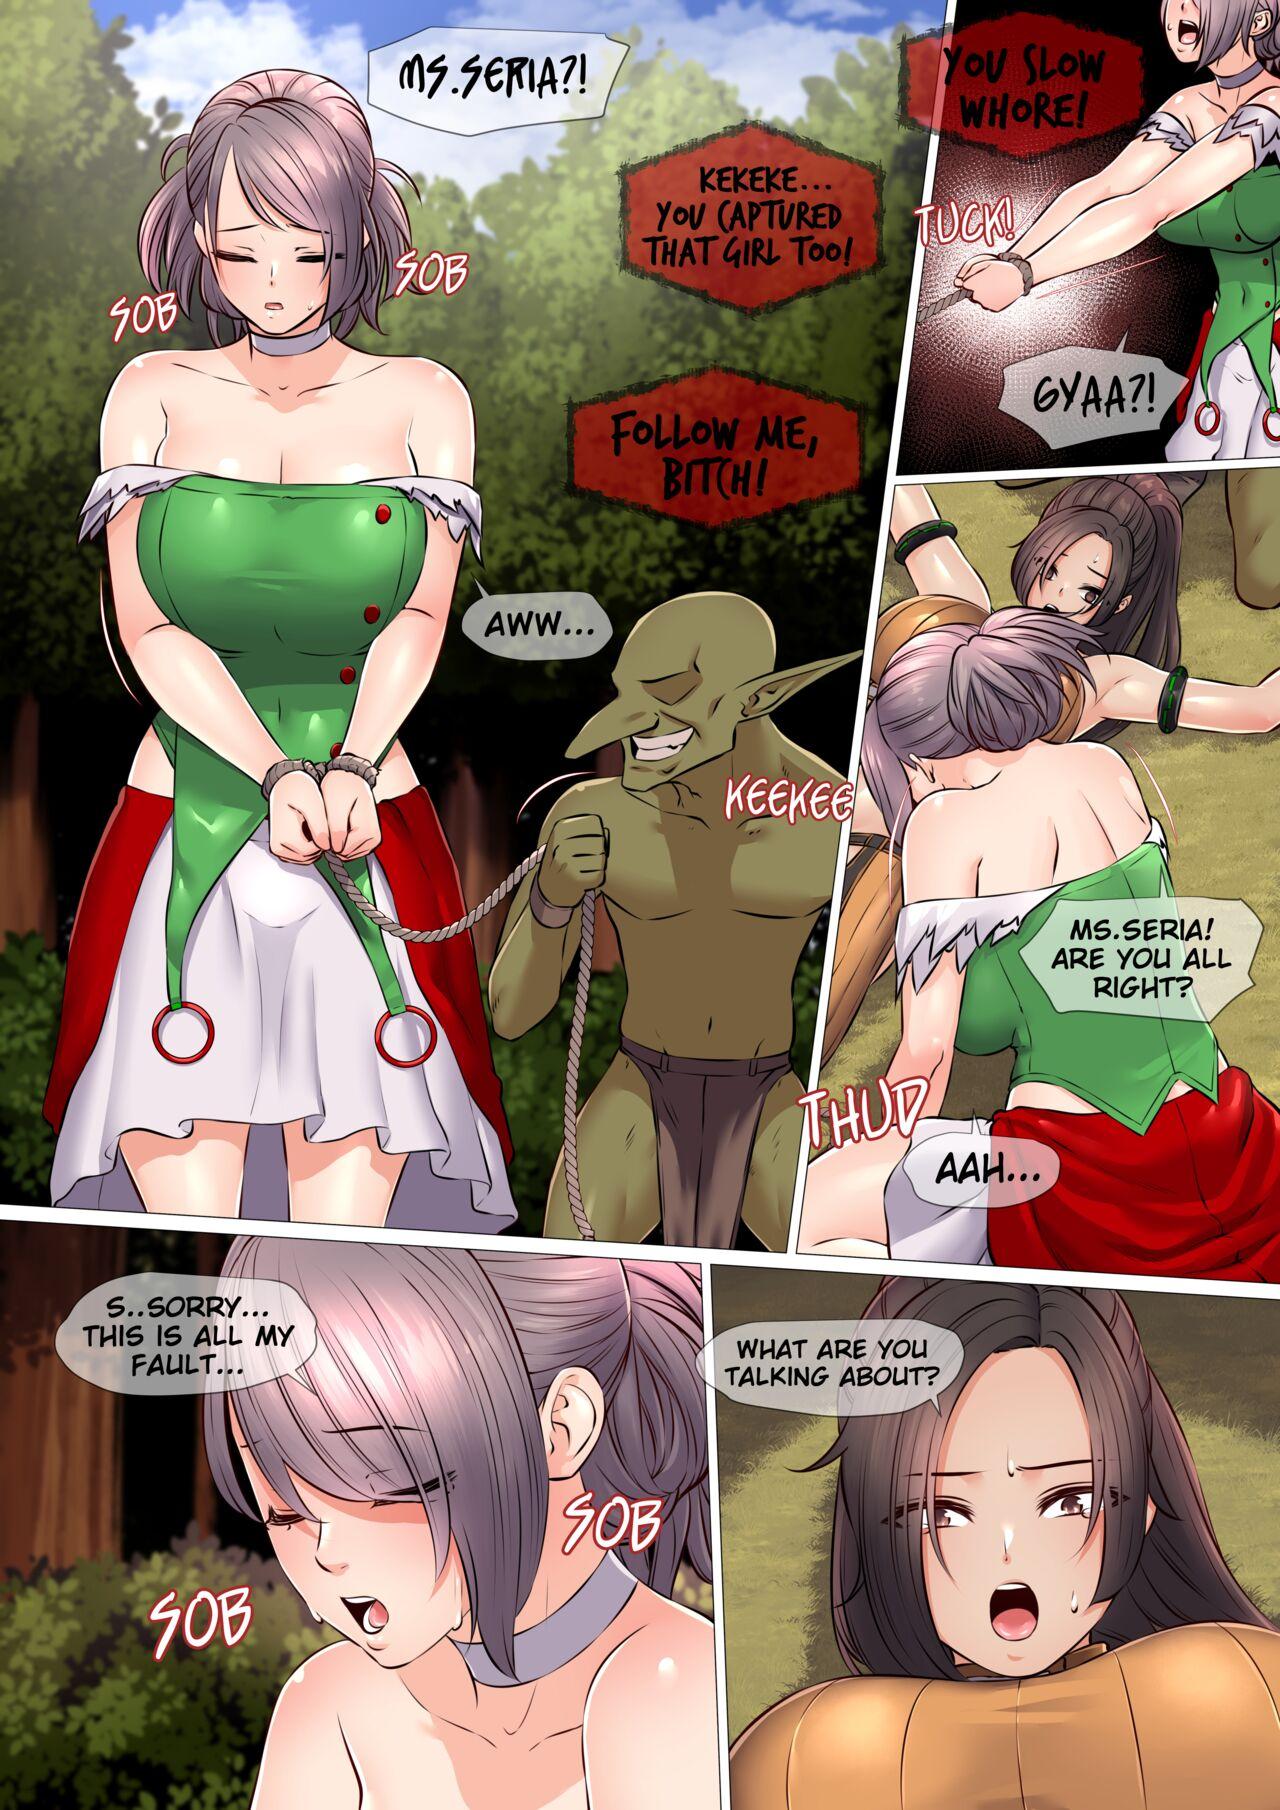 Ecchi Goblin's Slaves - Dungeon fighter online Interacial - Page 4